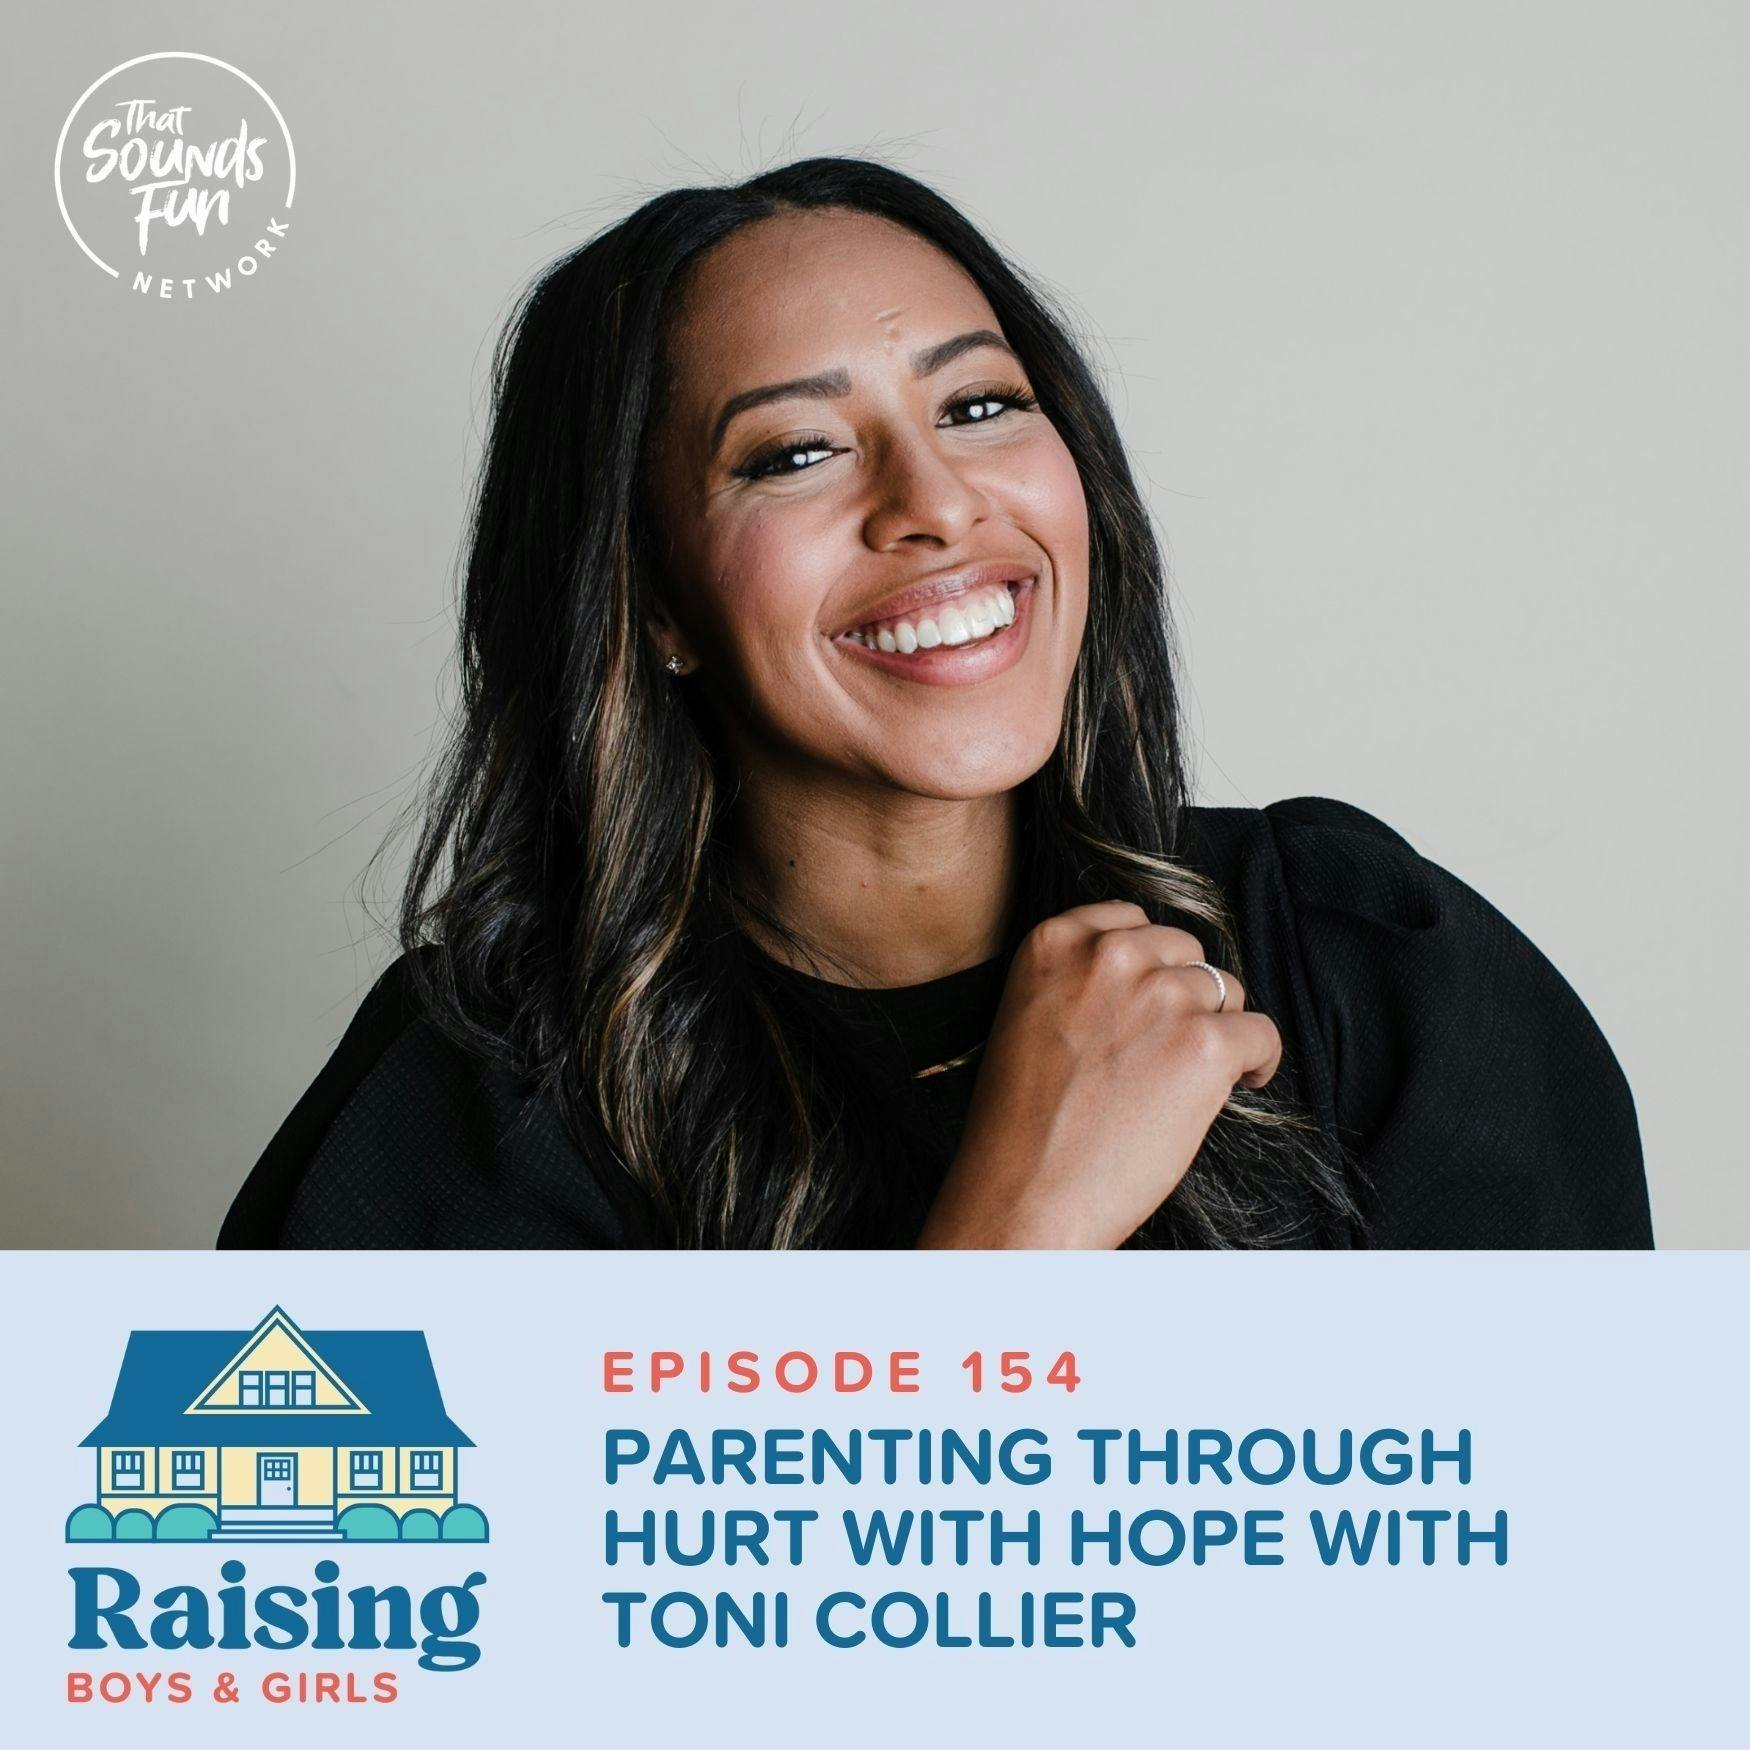 Episode 154: Parenting through Hurt with Hope with Toni Collier